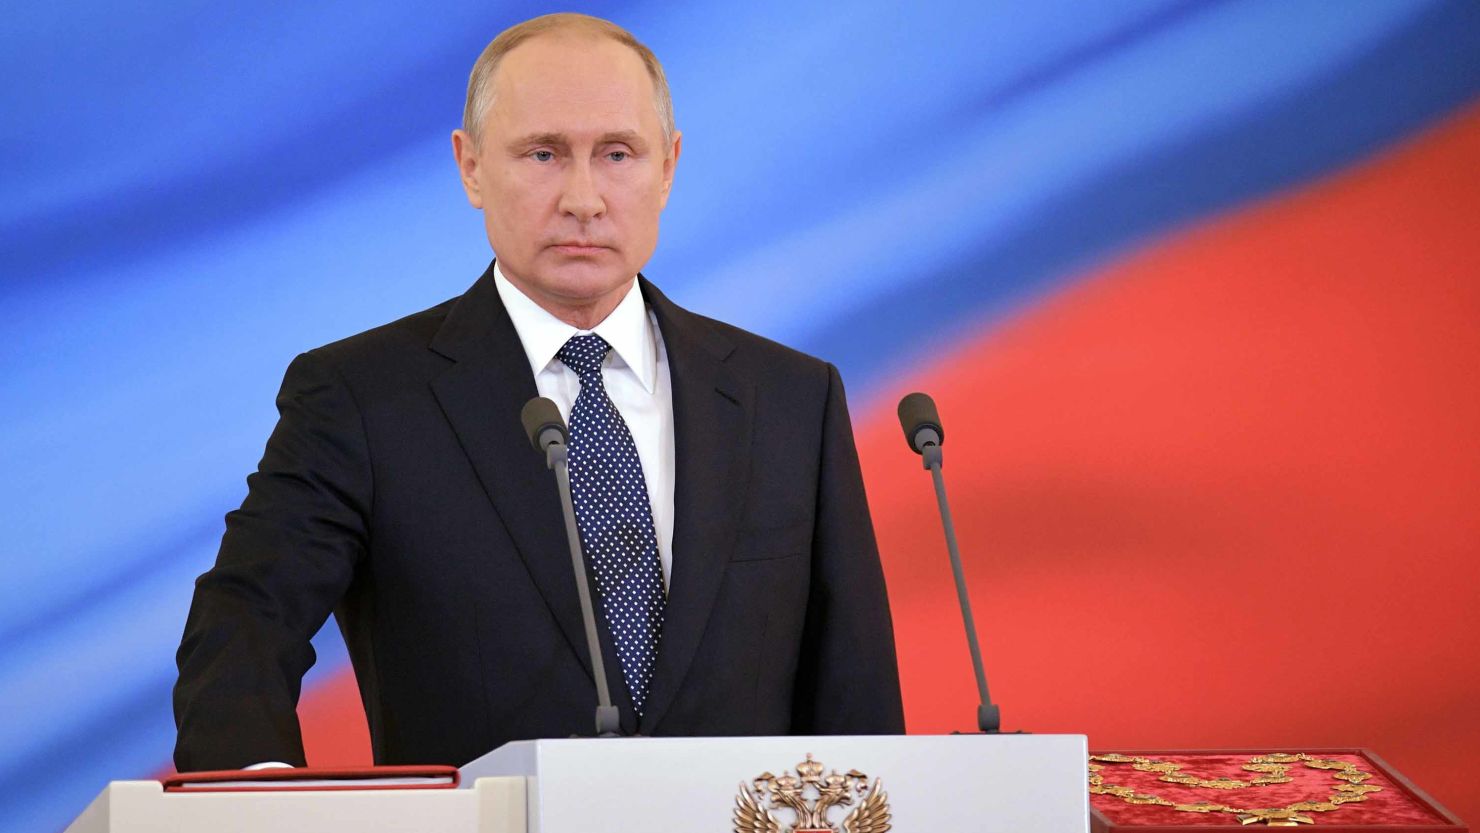 Russian president-elect Vladimir Putin takes the oath of office during a ceremony at the Kremlin in Moscow on May 7.
